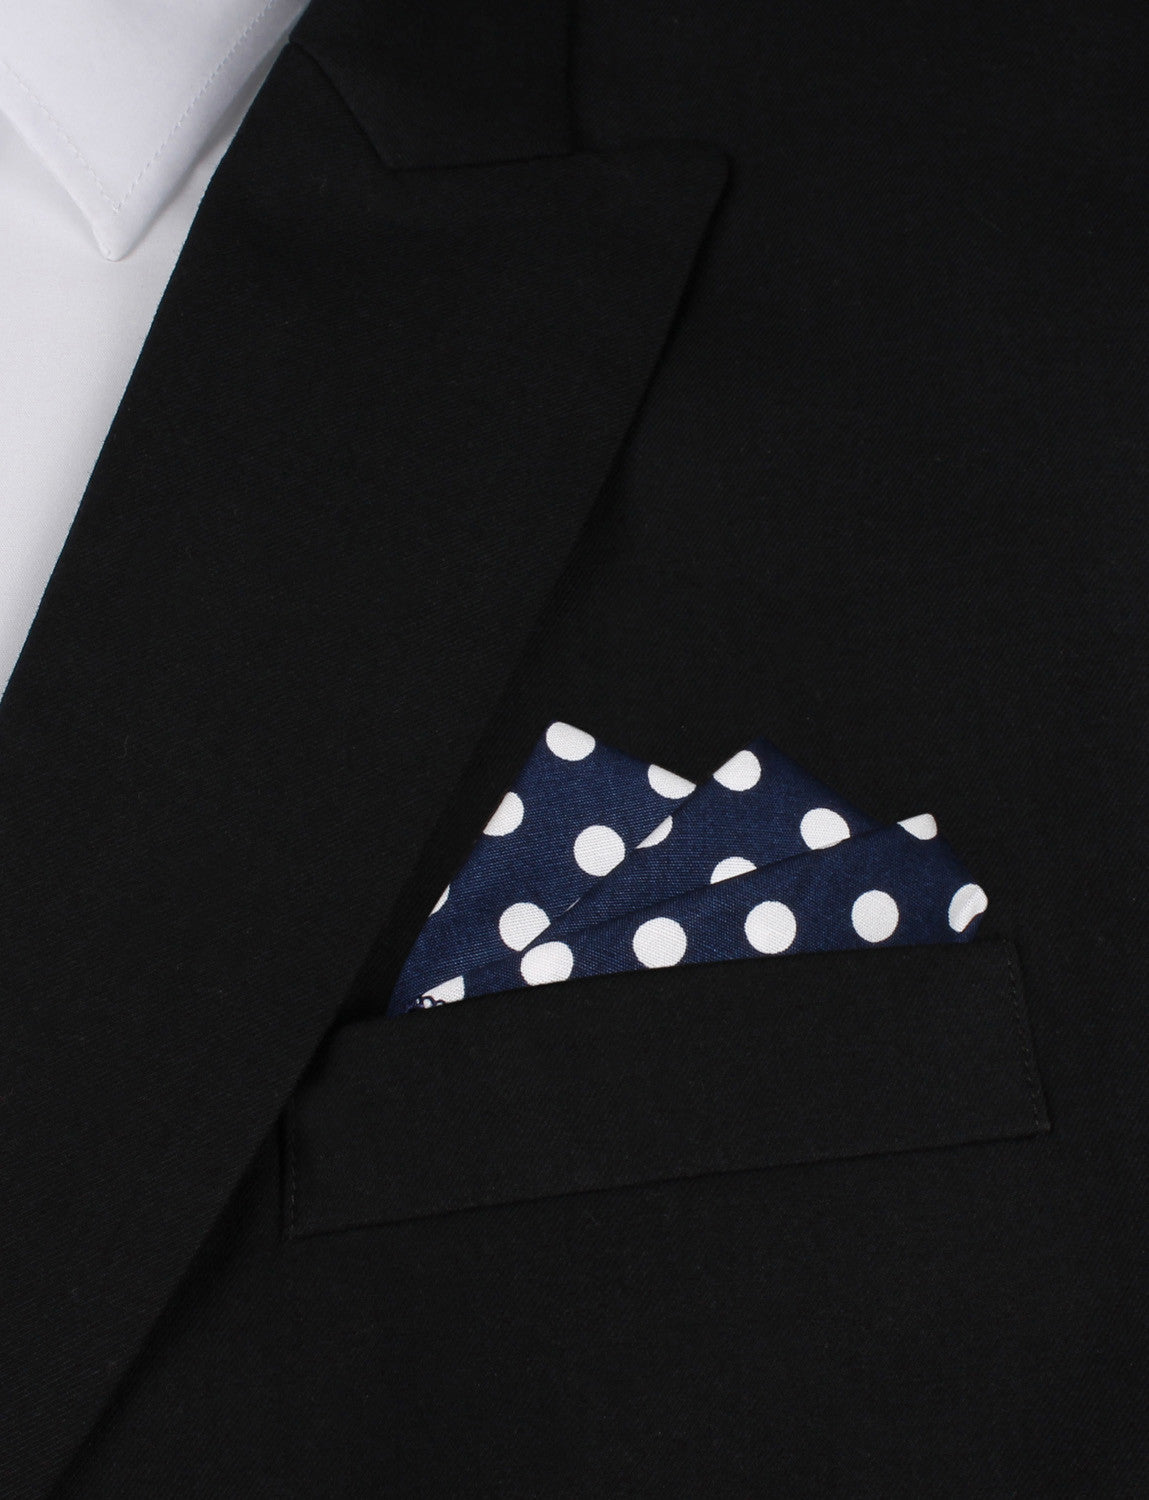 Navy Blue with White Large Polka Dots Cotton Oxygen Three Point Pocket Square Fold